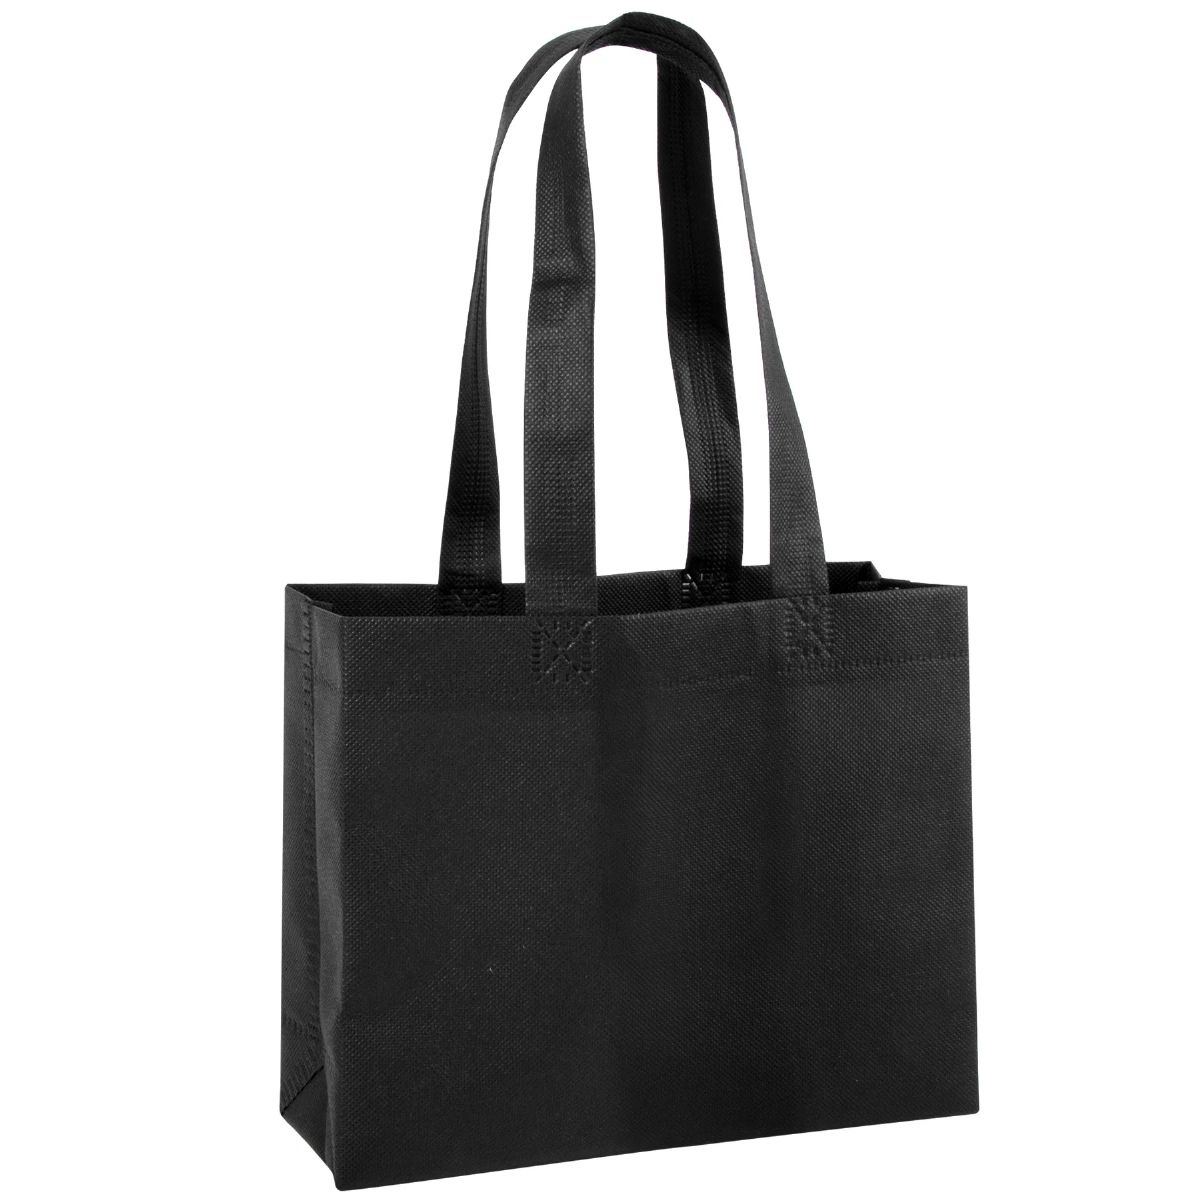 100 Pieces of Gift Tote Bag 8 X 10 Black Only